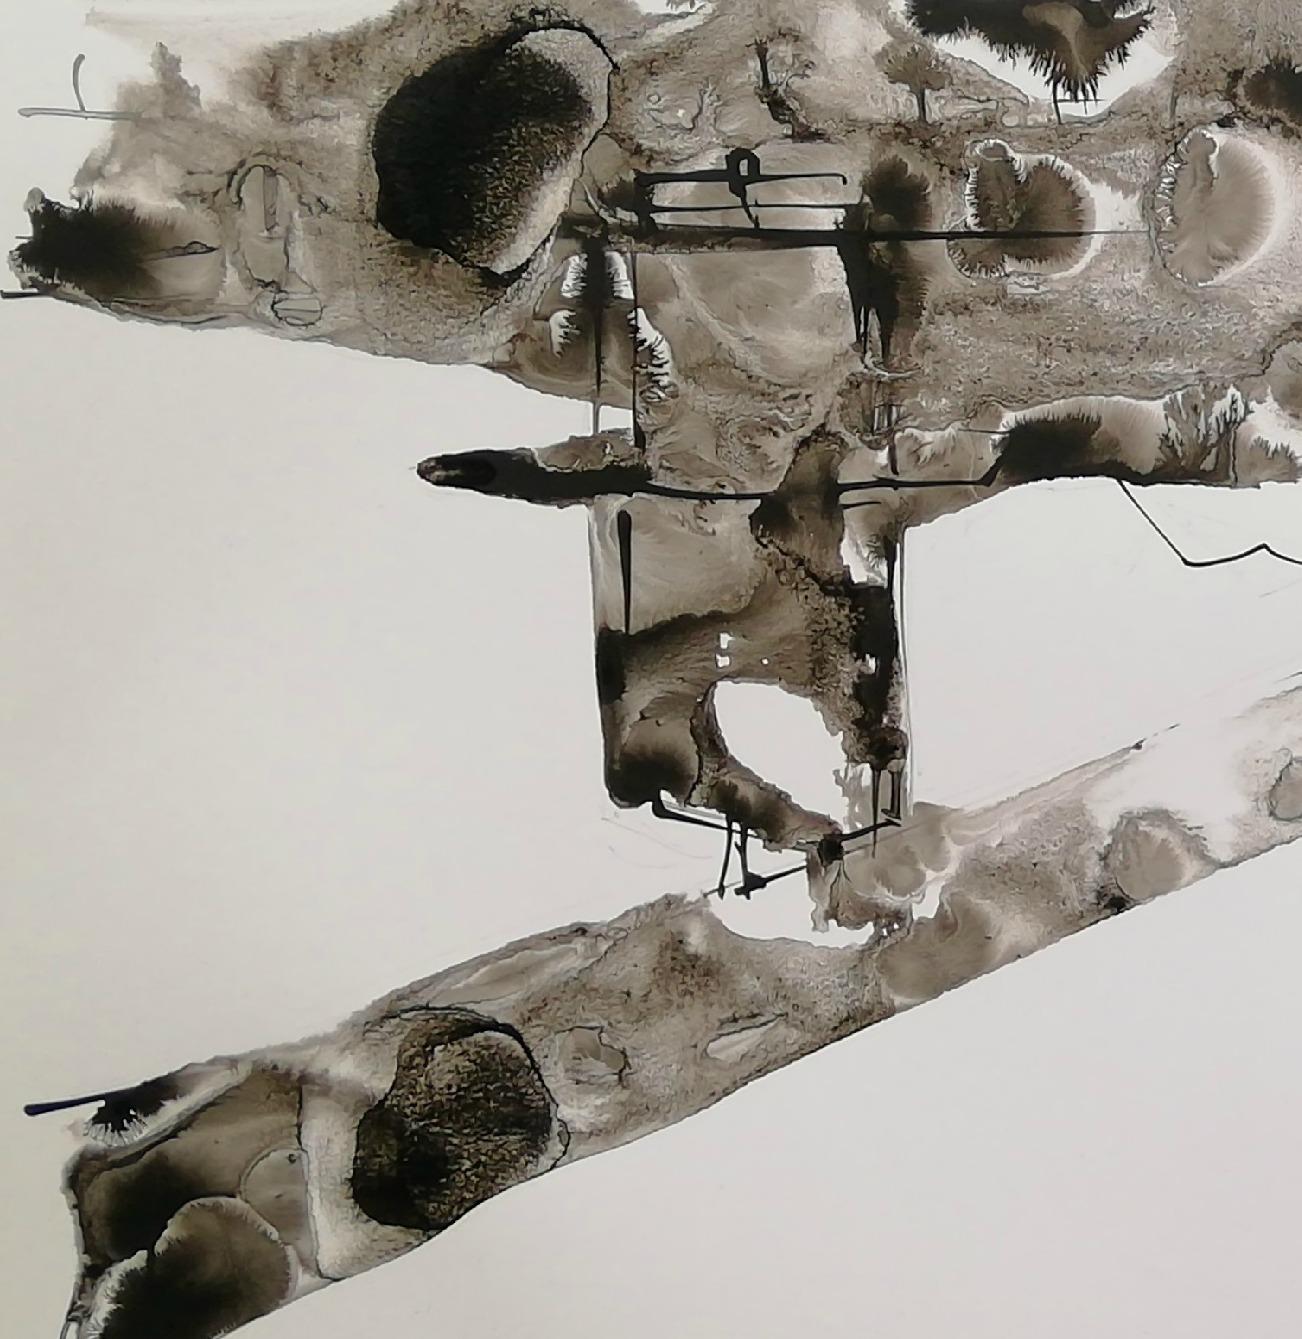 'Karlovac's Grey' is a stunning contemporary abstract ink painting on cardboard by Croatian emerging artist - Alfred Freddy Krupa. It is an expressionist landscape artwork showing Banjia bridge over Kupa river with a traditional Japanese calligraphy